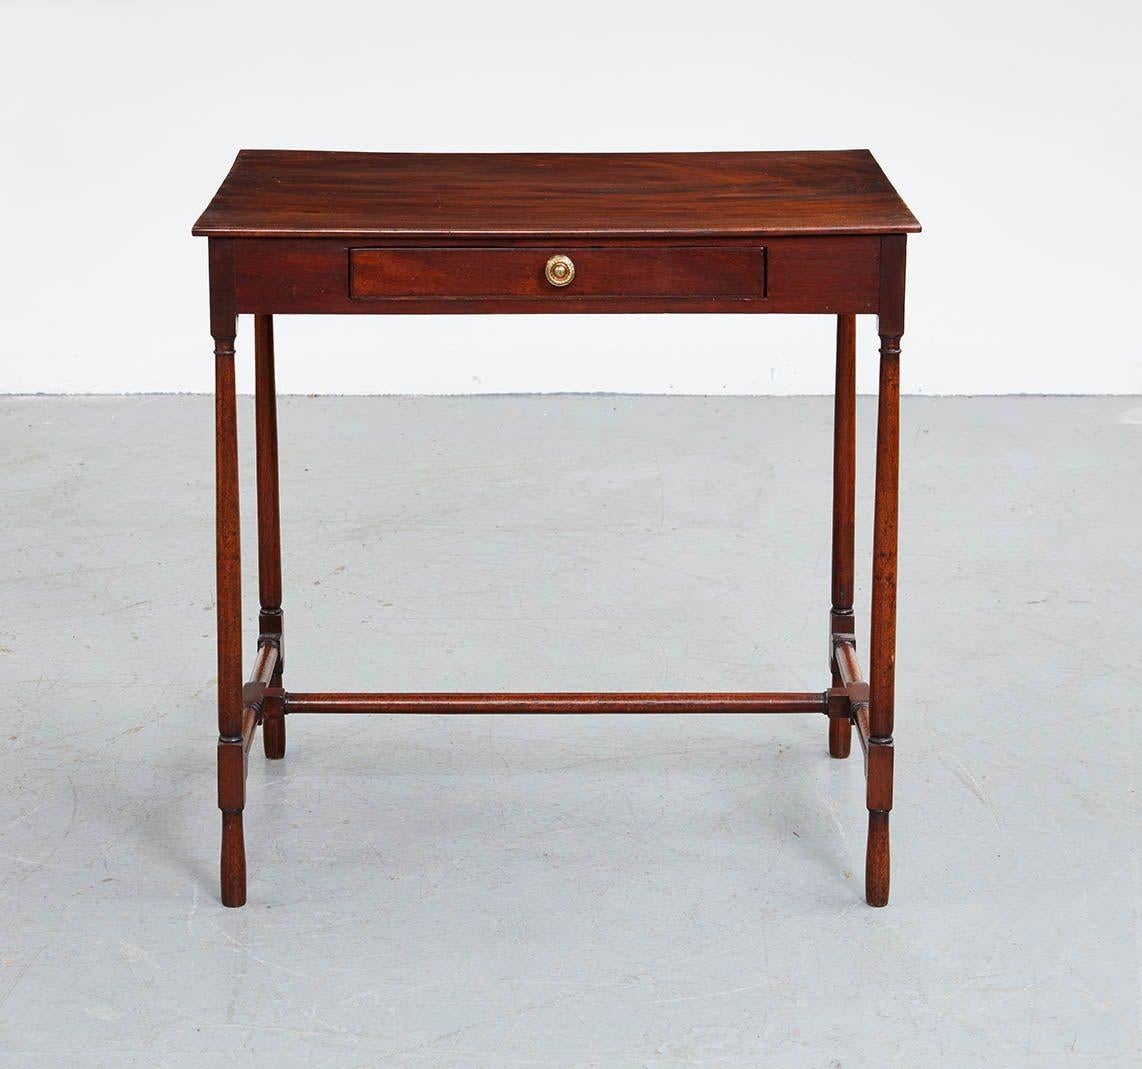 Good George III Mahogany single drawer stretcher base table, the single plank top with vivid graining, over single drawer retaining original gilt brass pull and with mahogany linings and drawer bottom, standing on simple turned legs joined by